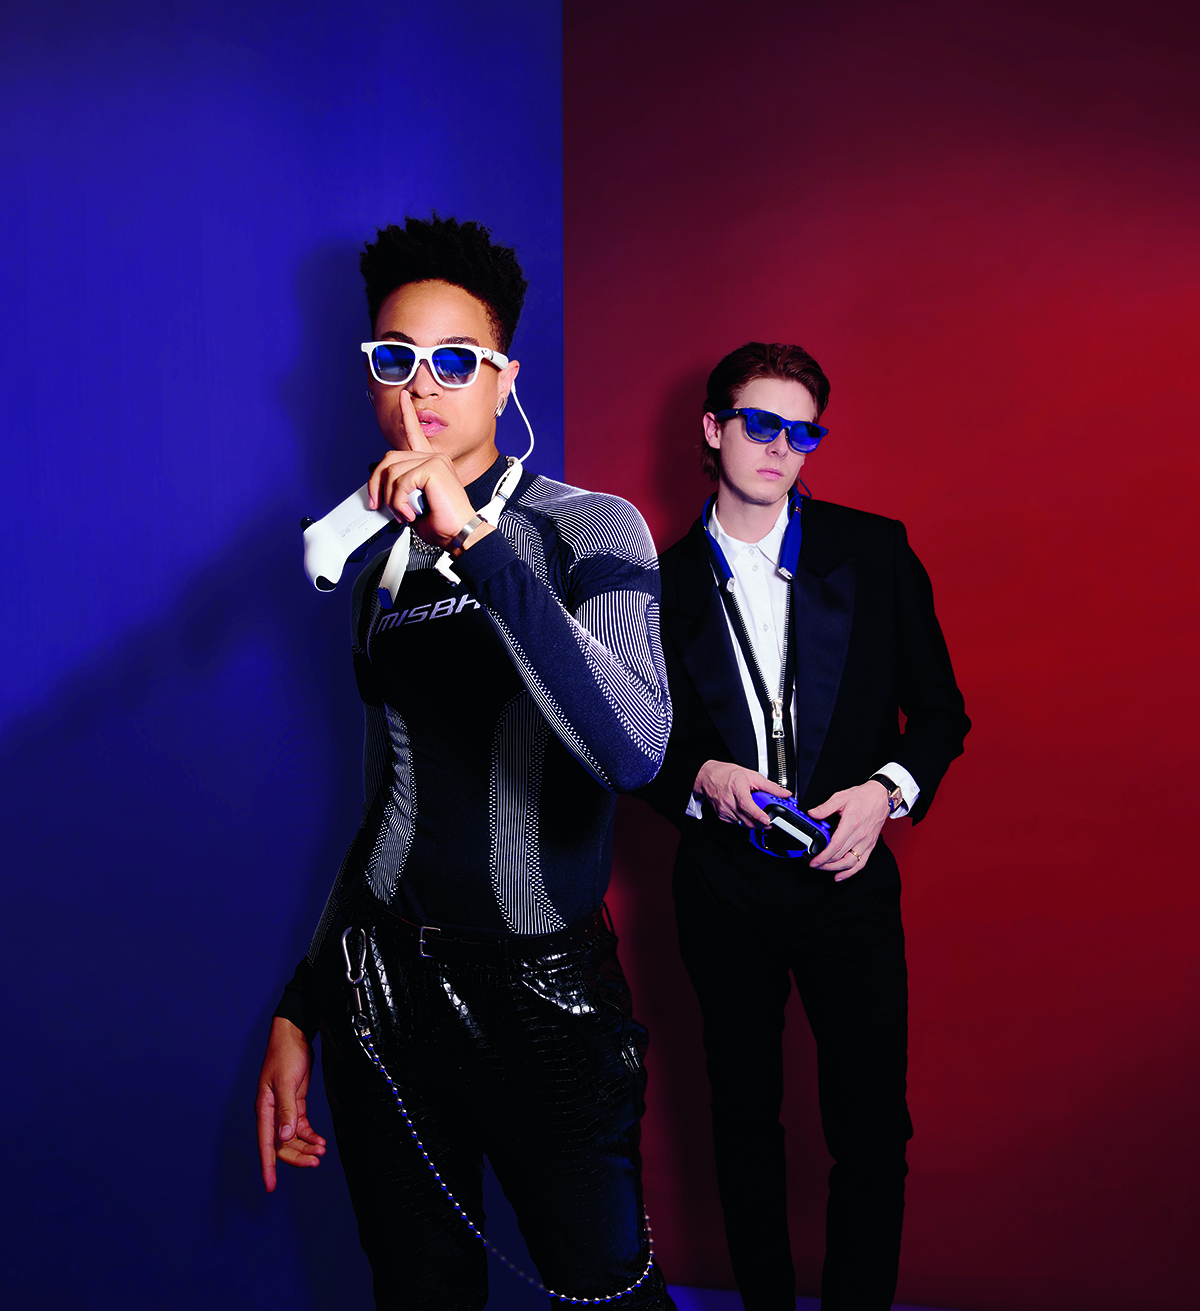 purple and red background with a model with his finger to his lips in a leather outfit wearing glasses and a man wearing a suit in the background also wearing glasses